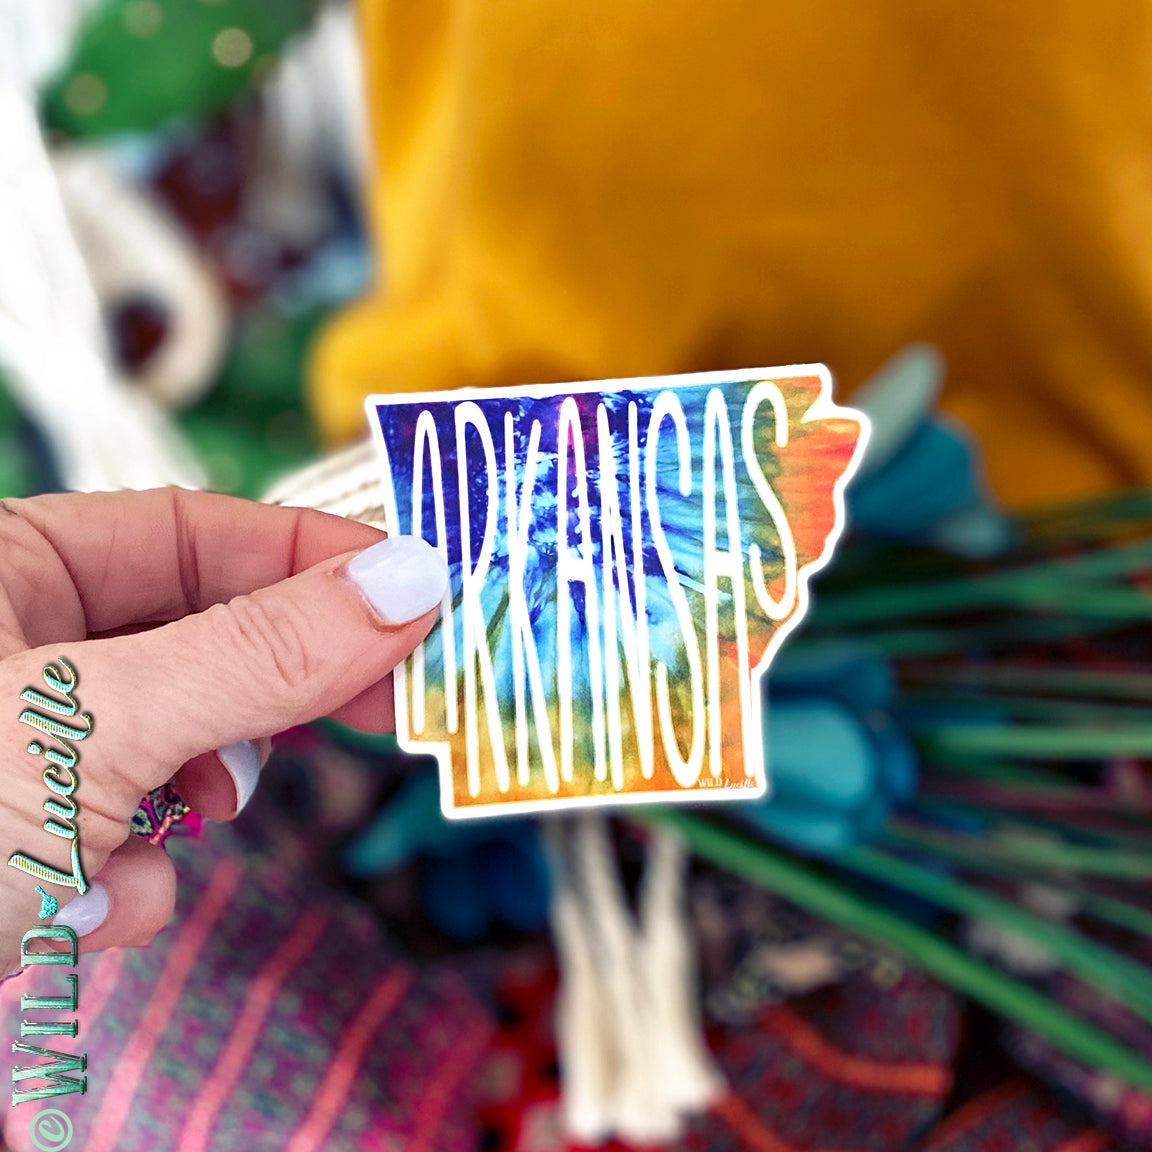 Tiedye State-themed Vinyl Sticker Decals - All States Available!